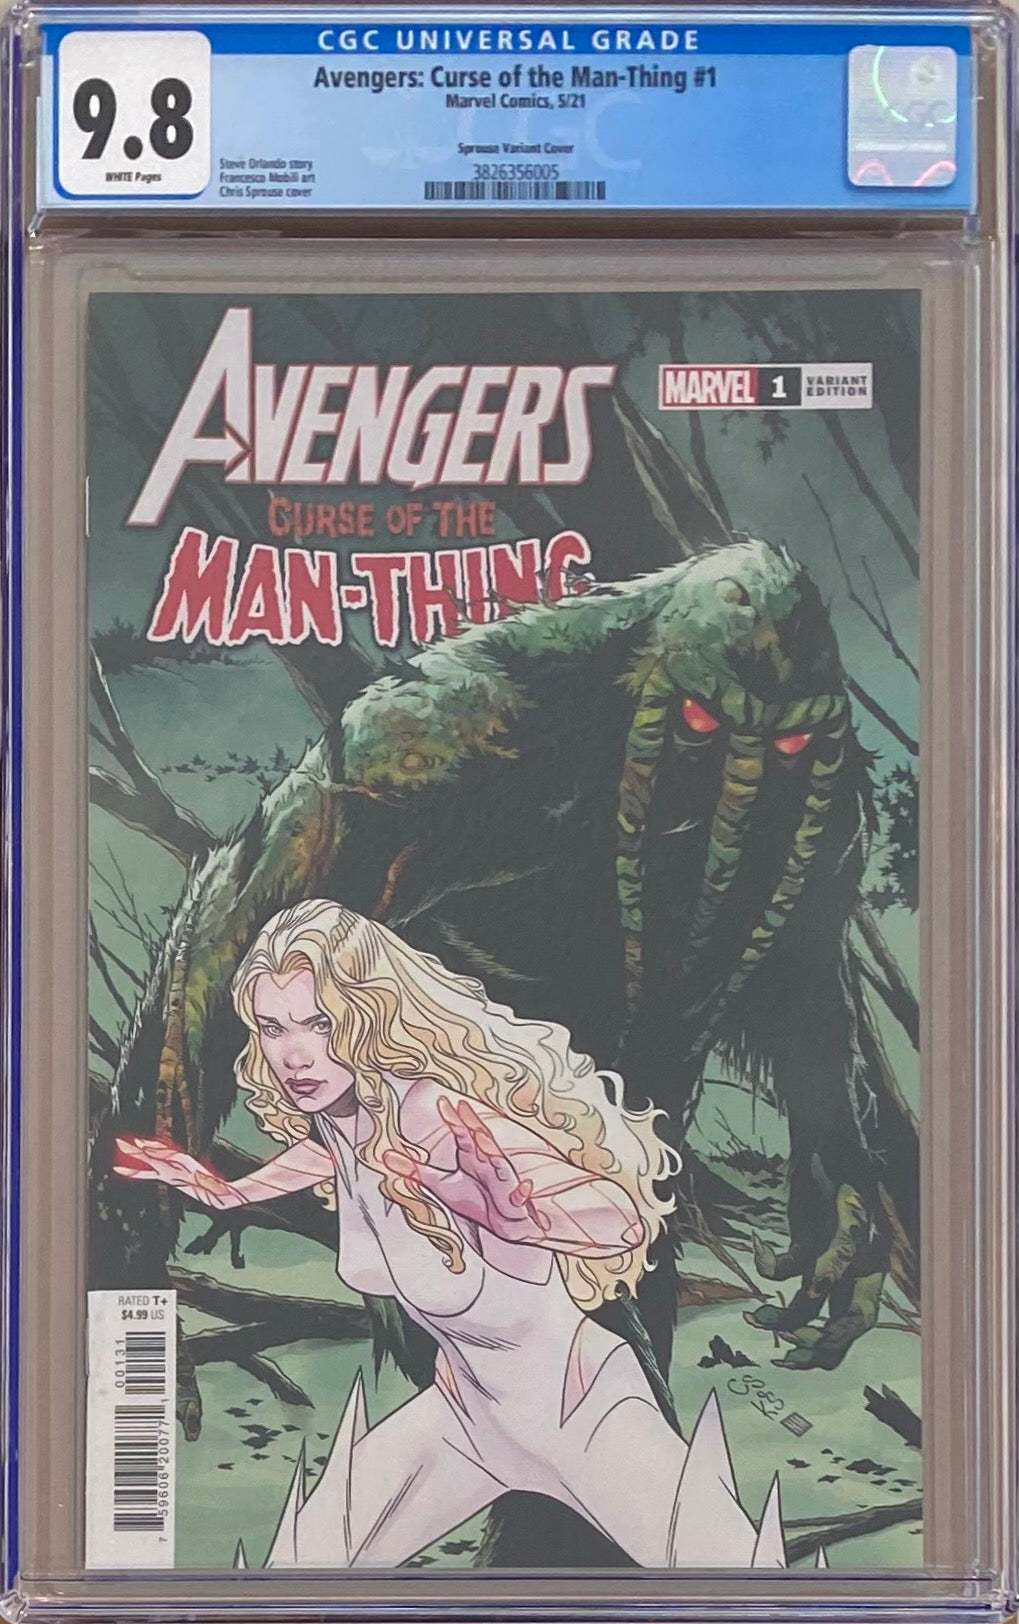 Avengers: Curse of the Man-Thing #1 Sprouse Variant CGC 9.8